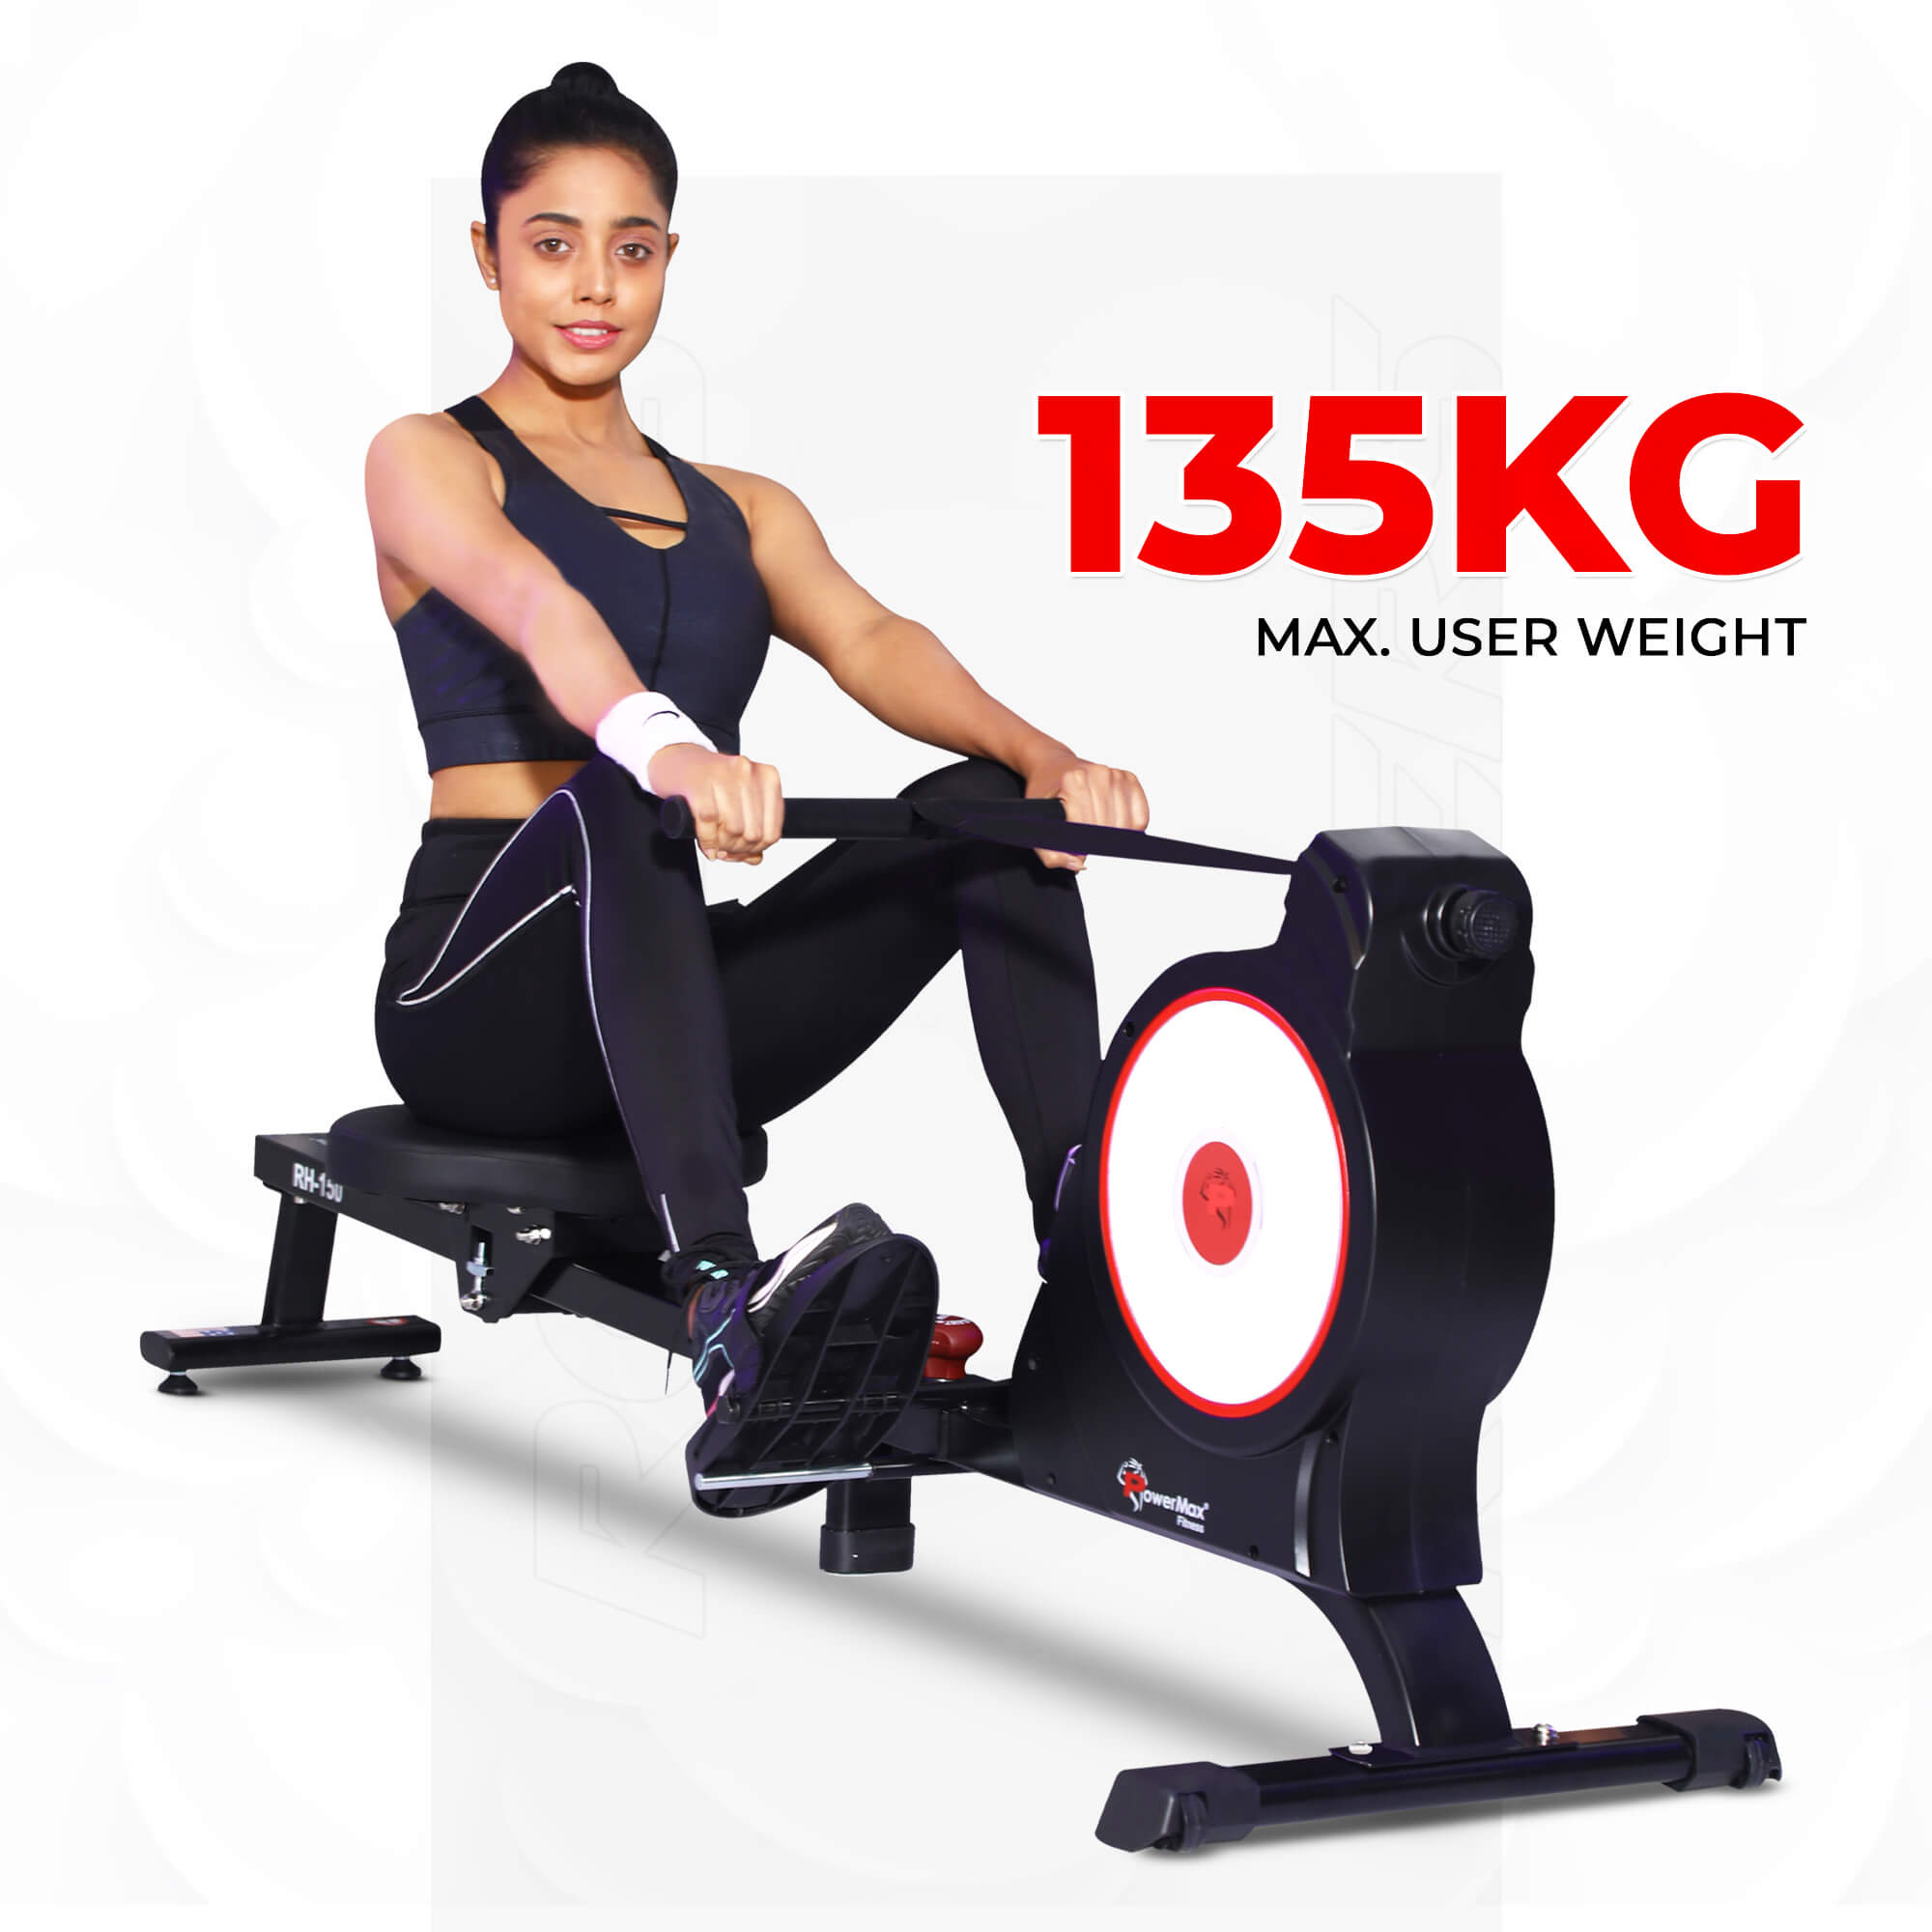 PowerMax RH-150 Magnetic Foldable Rowing Machine for Home Use